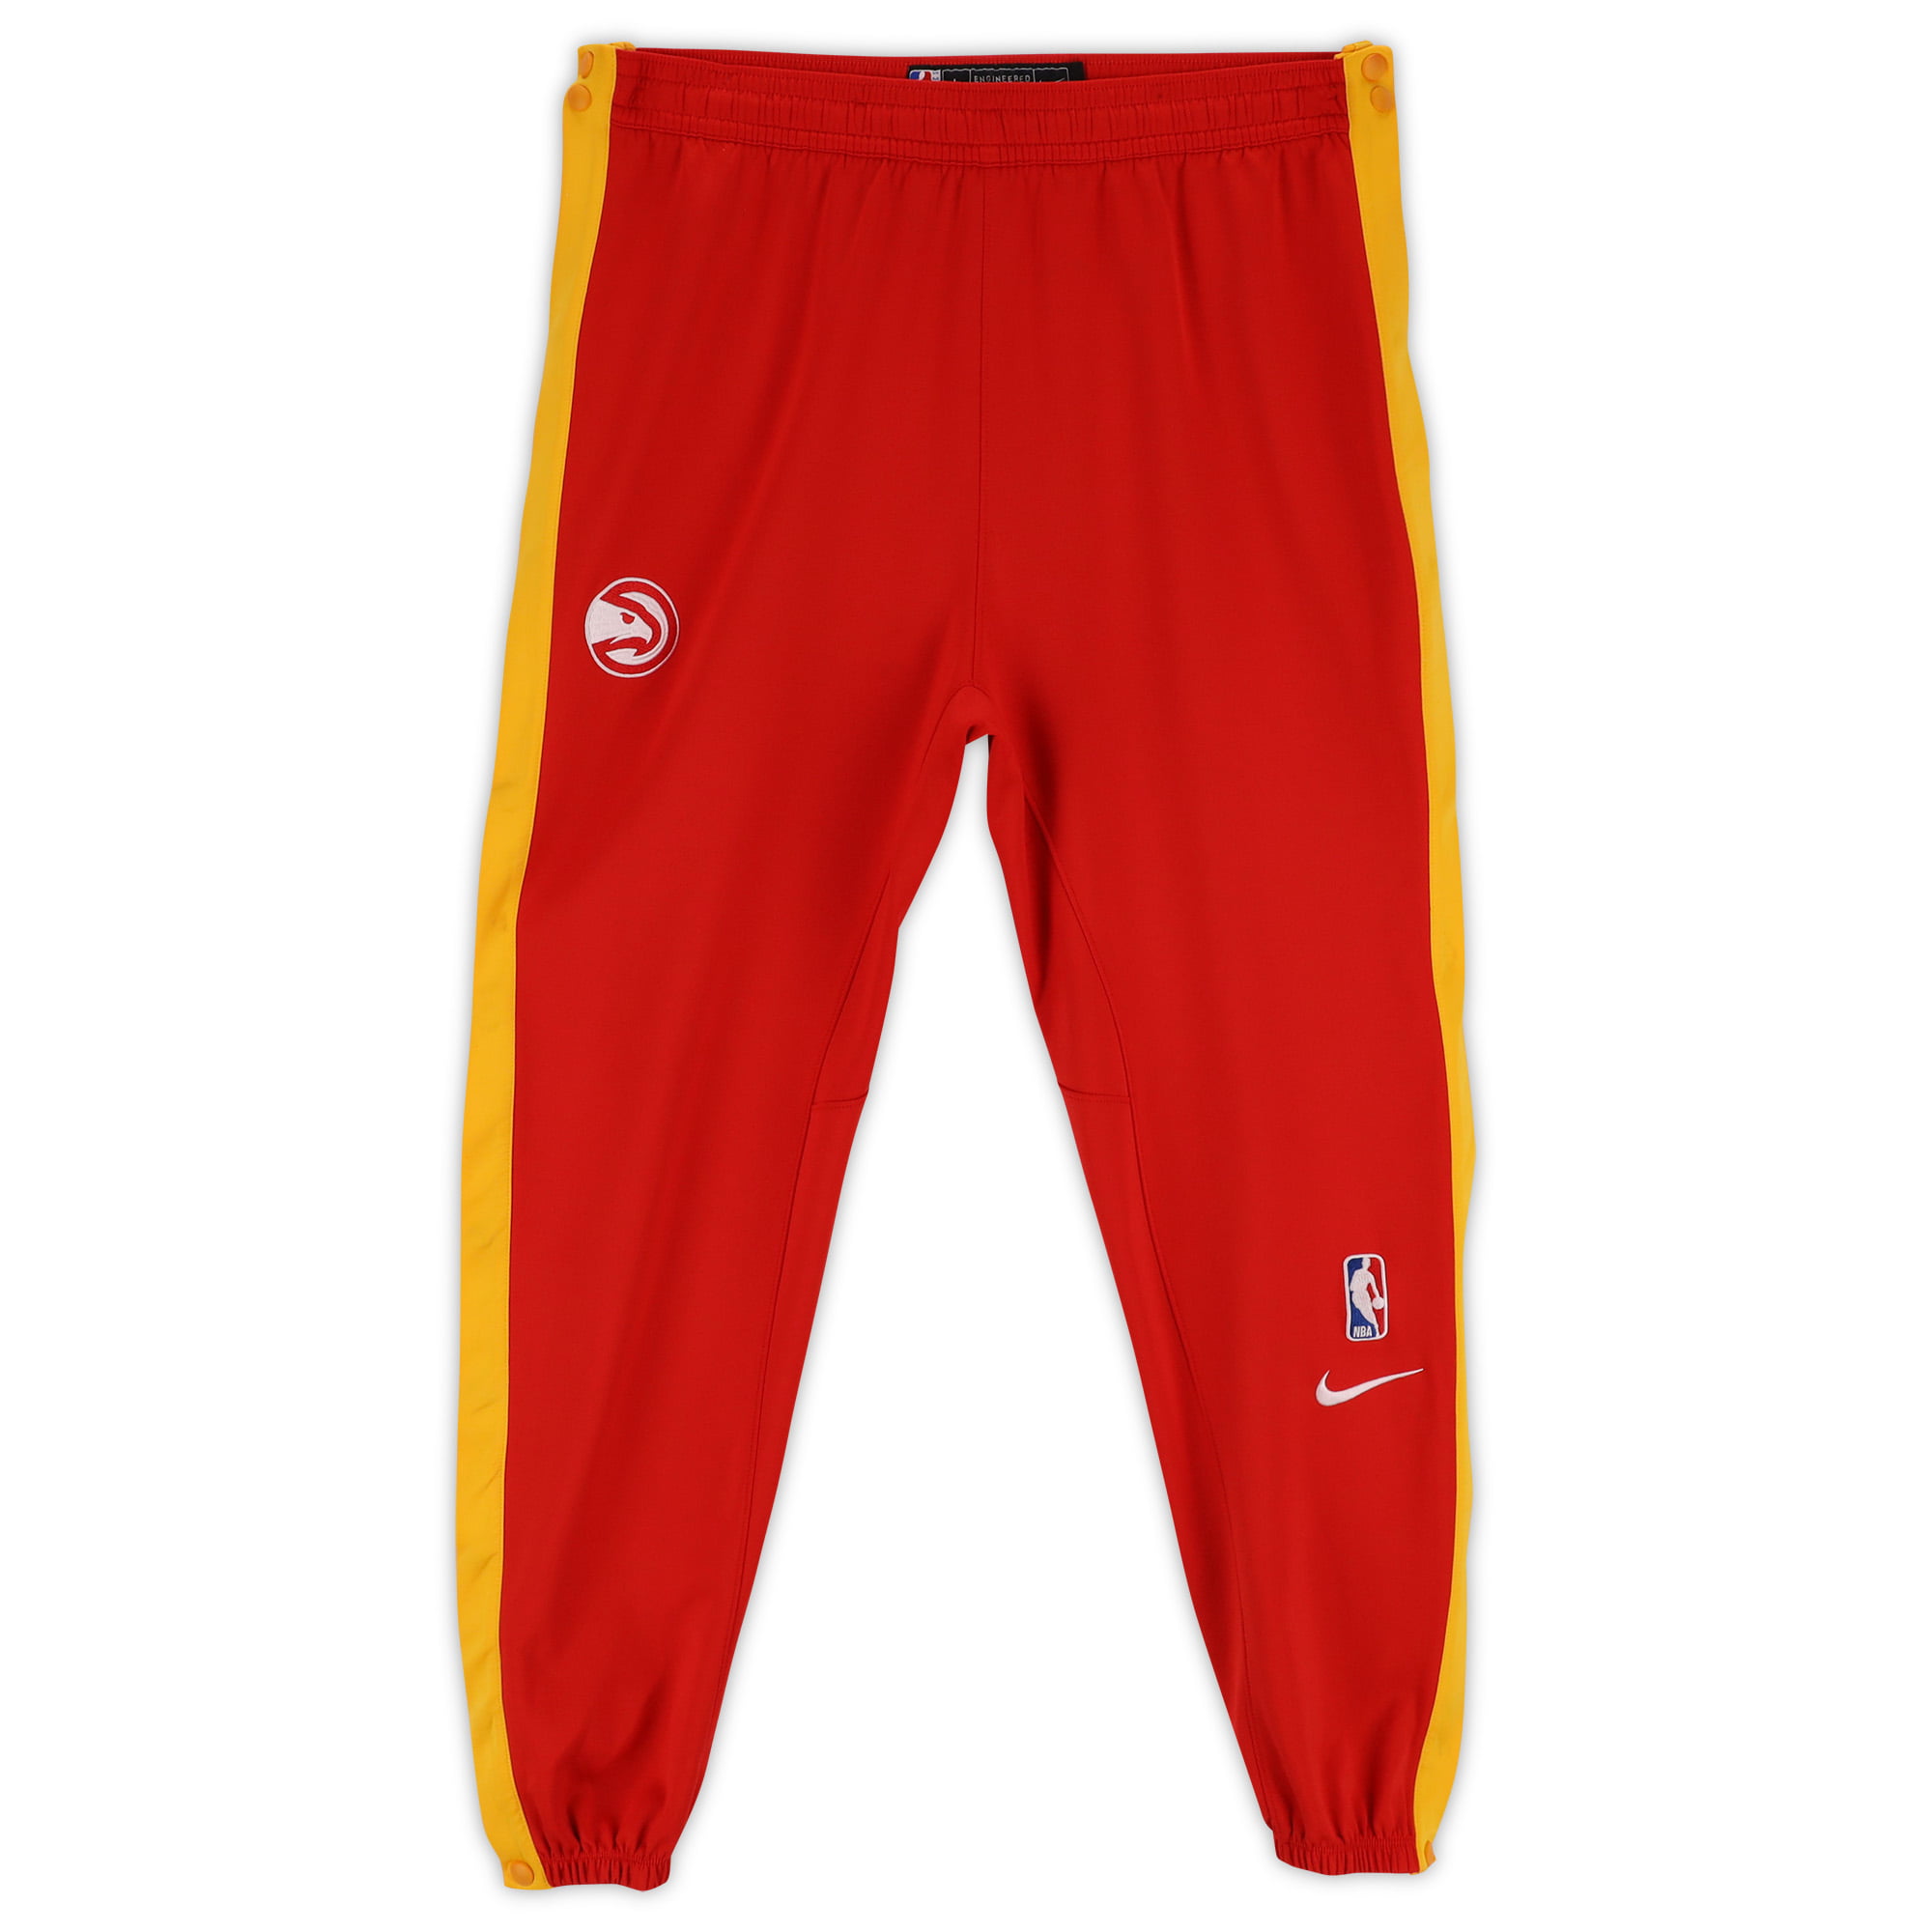 Atlanta Hawks Team-Issued Red Pants from the 2022-23 NBA Season - Size XLT  - Fanatics Authentic Certified